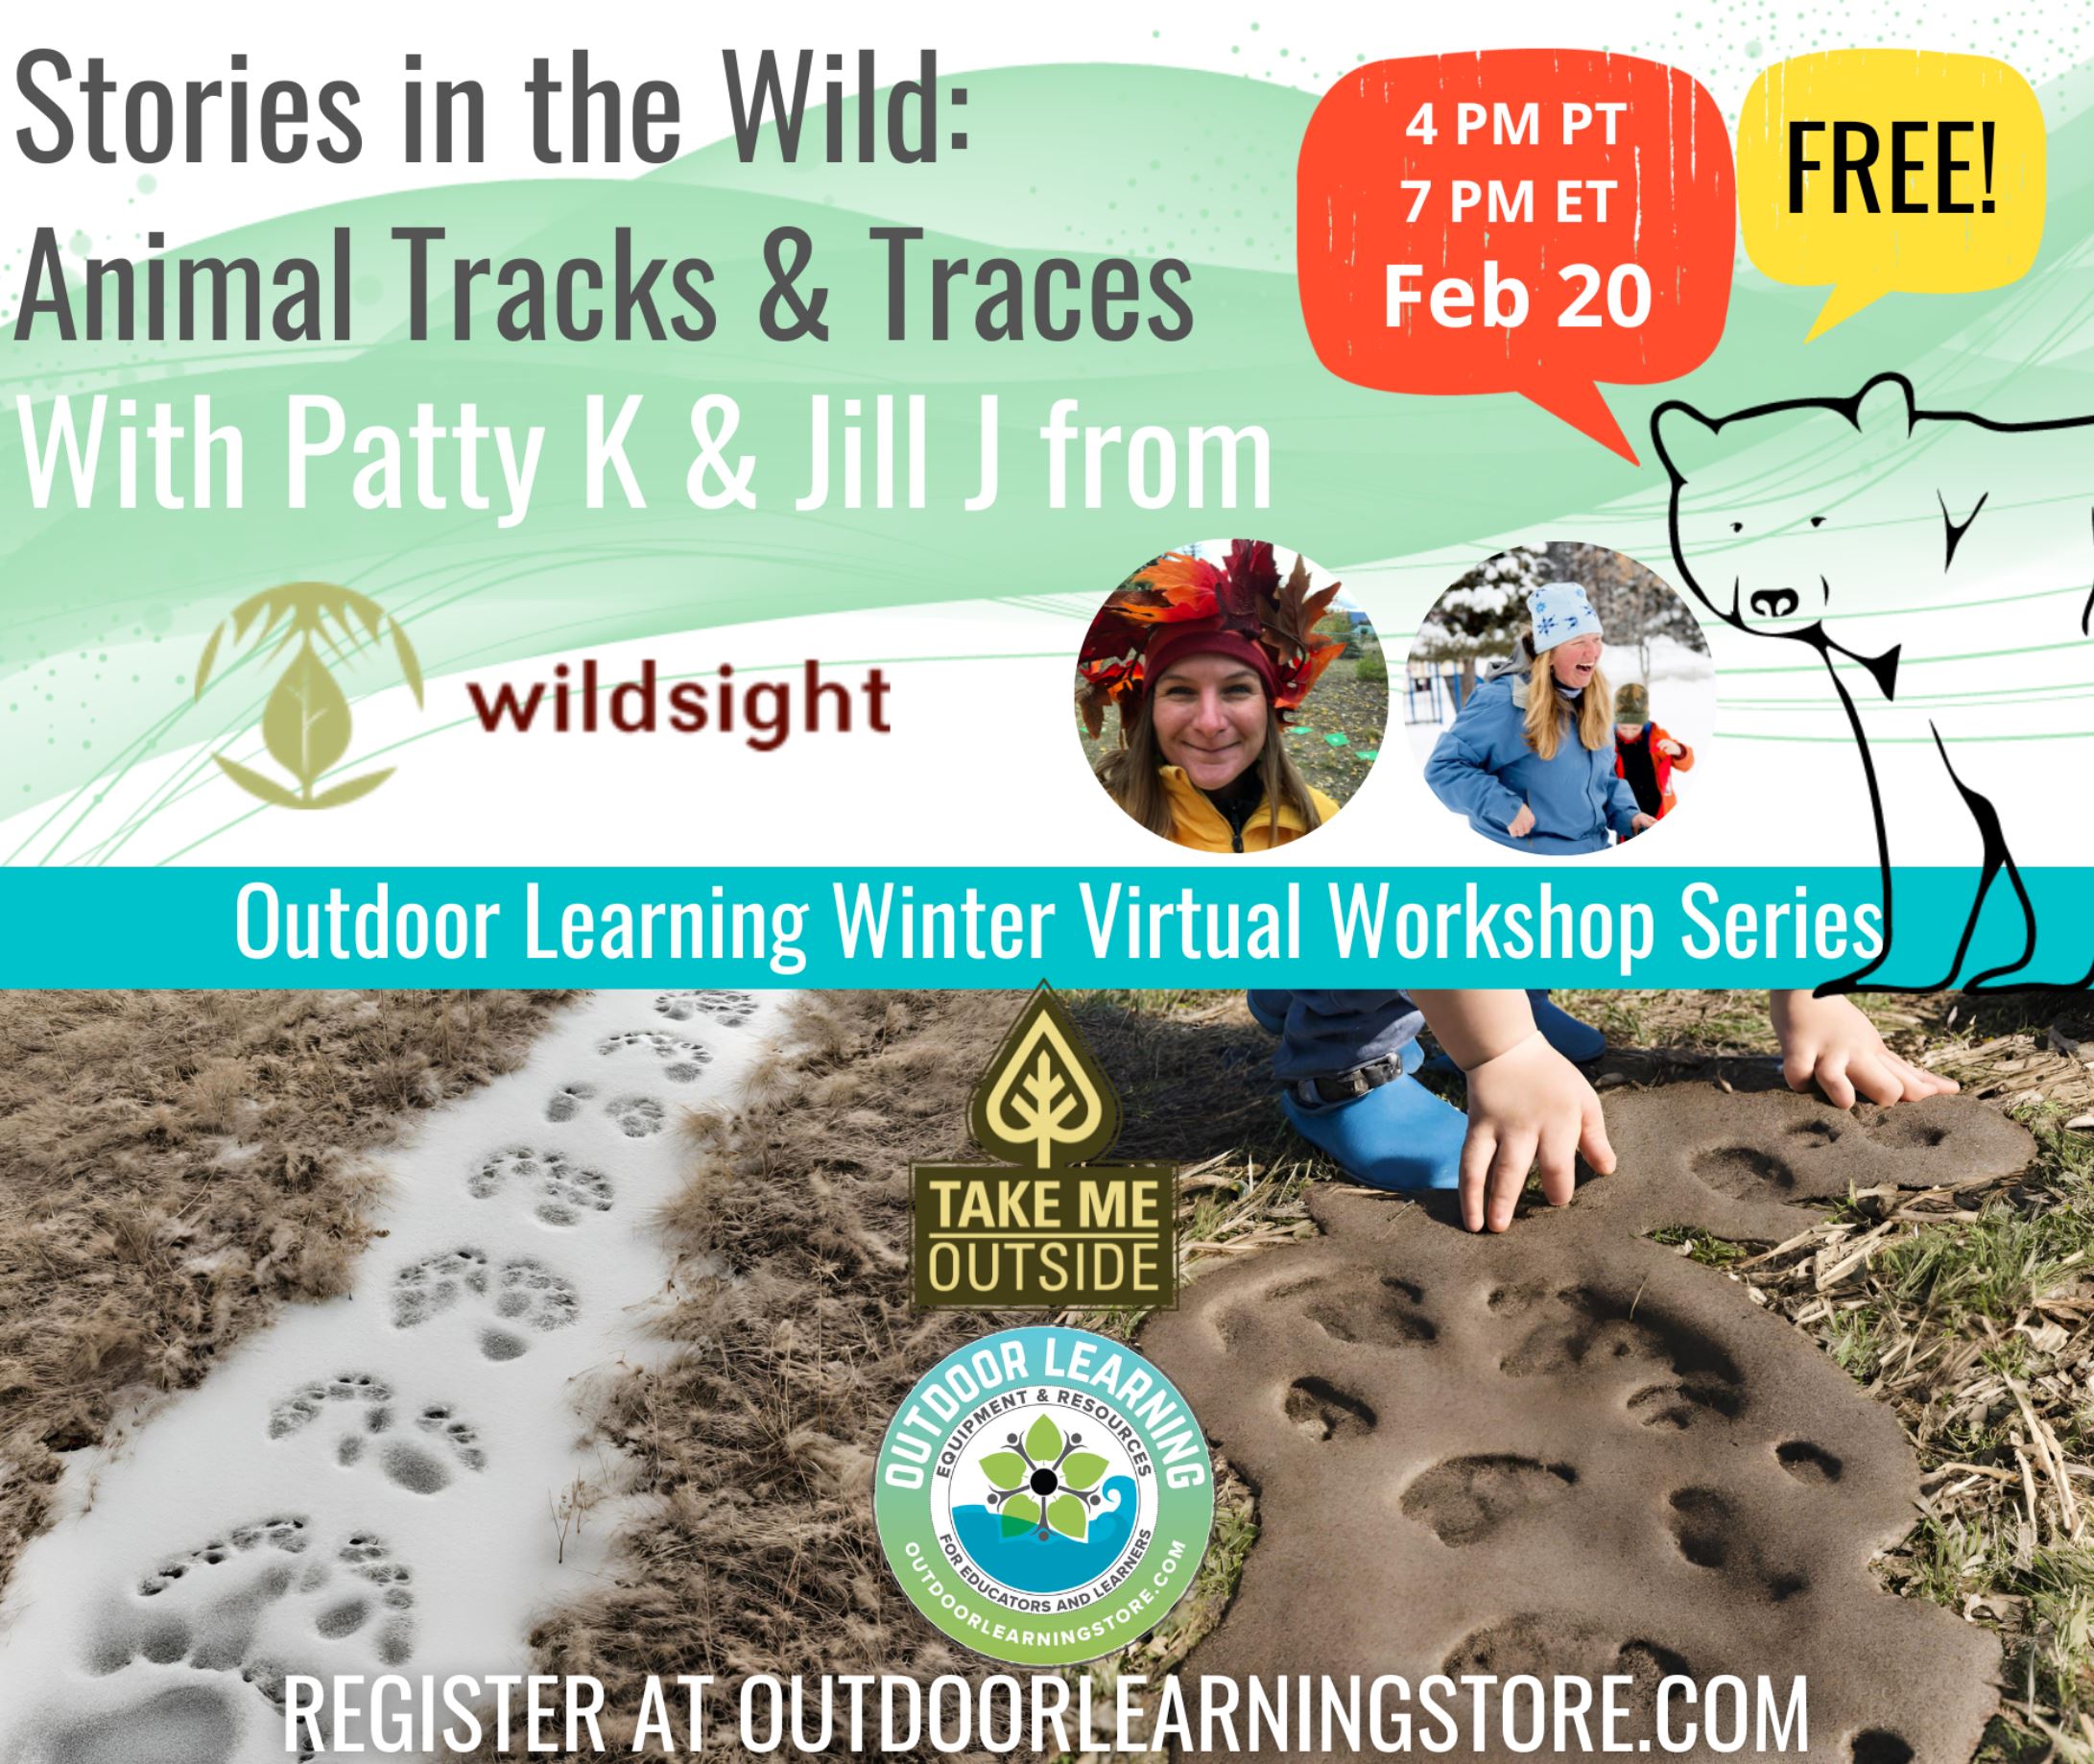 Graphic divided in half by a blue bar with text that reads, "Outdoor Learning Winter Virtual Workshop Series." Top half displays text, "Stories in the Wild: Animal Tracks & Traces with Patty K and Jill J from WildSight. Feb 20. Free!" Bottom half shows two photos side-by-side of animal tracks in the snow and mud.